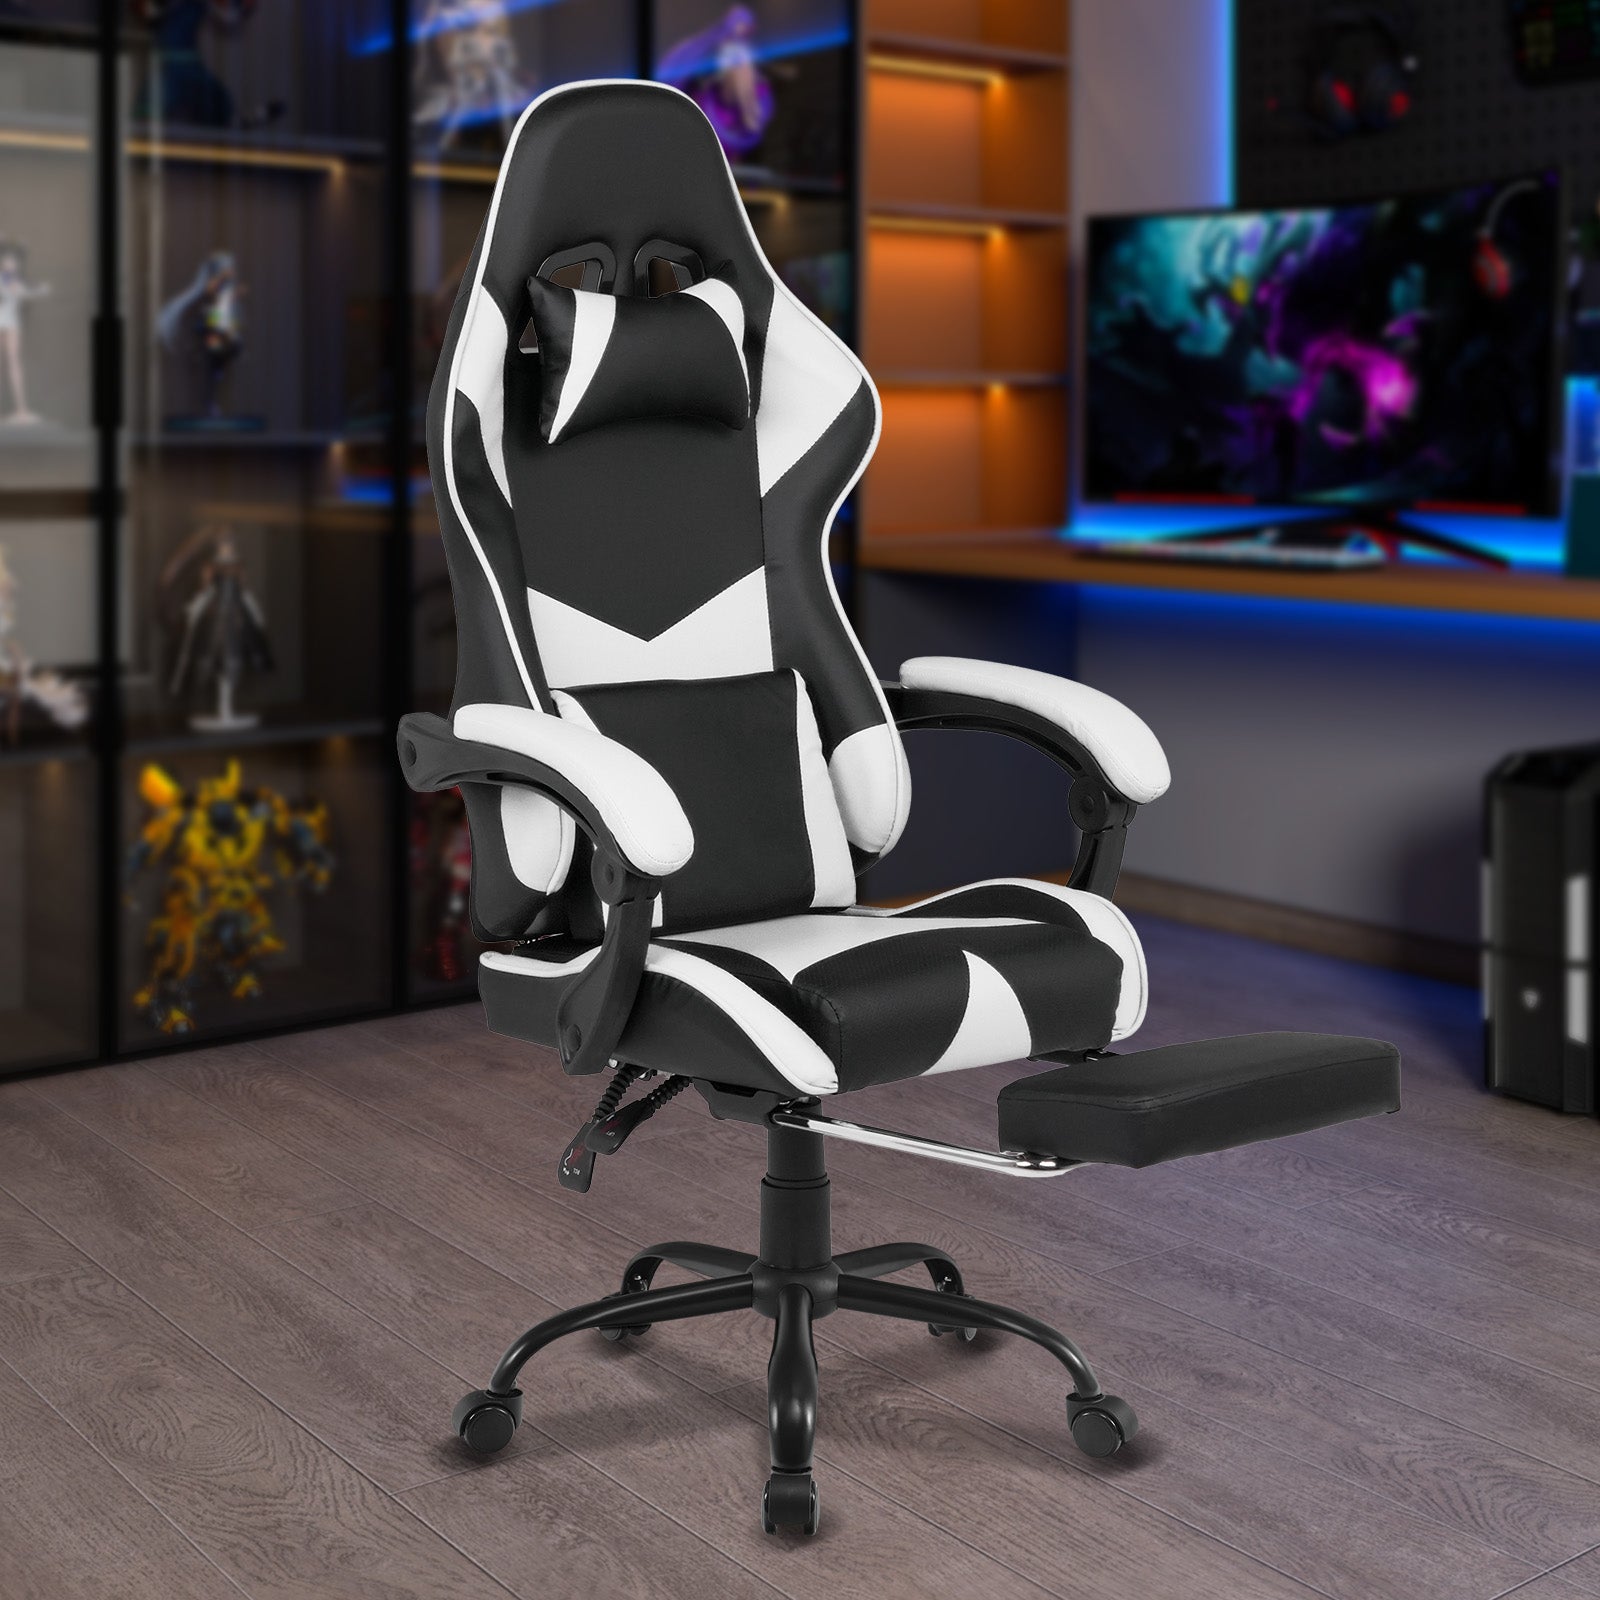 Advwin Gaming Chair Racing Recliner Ergonomic Office Chair PU Leather Seat with Footrest White